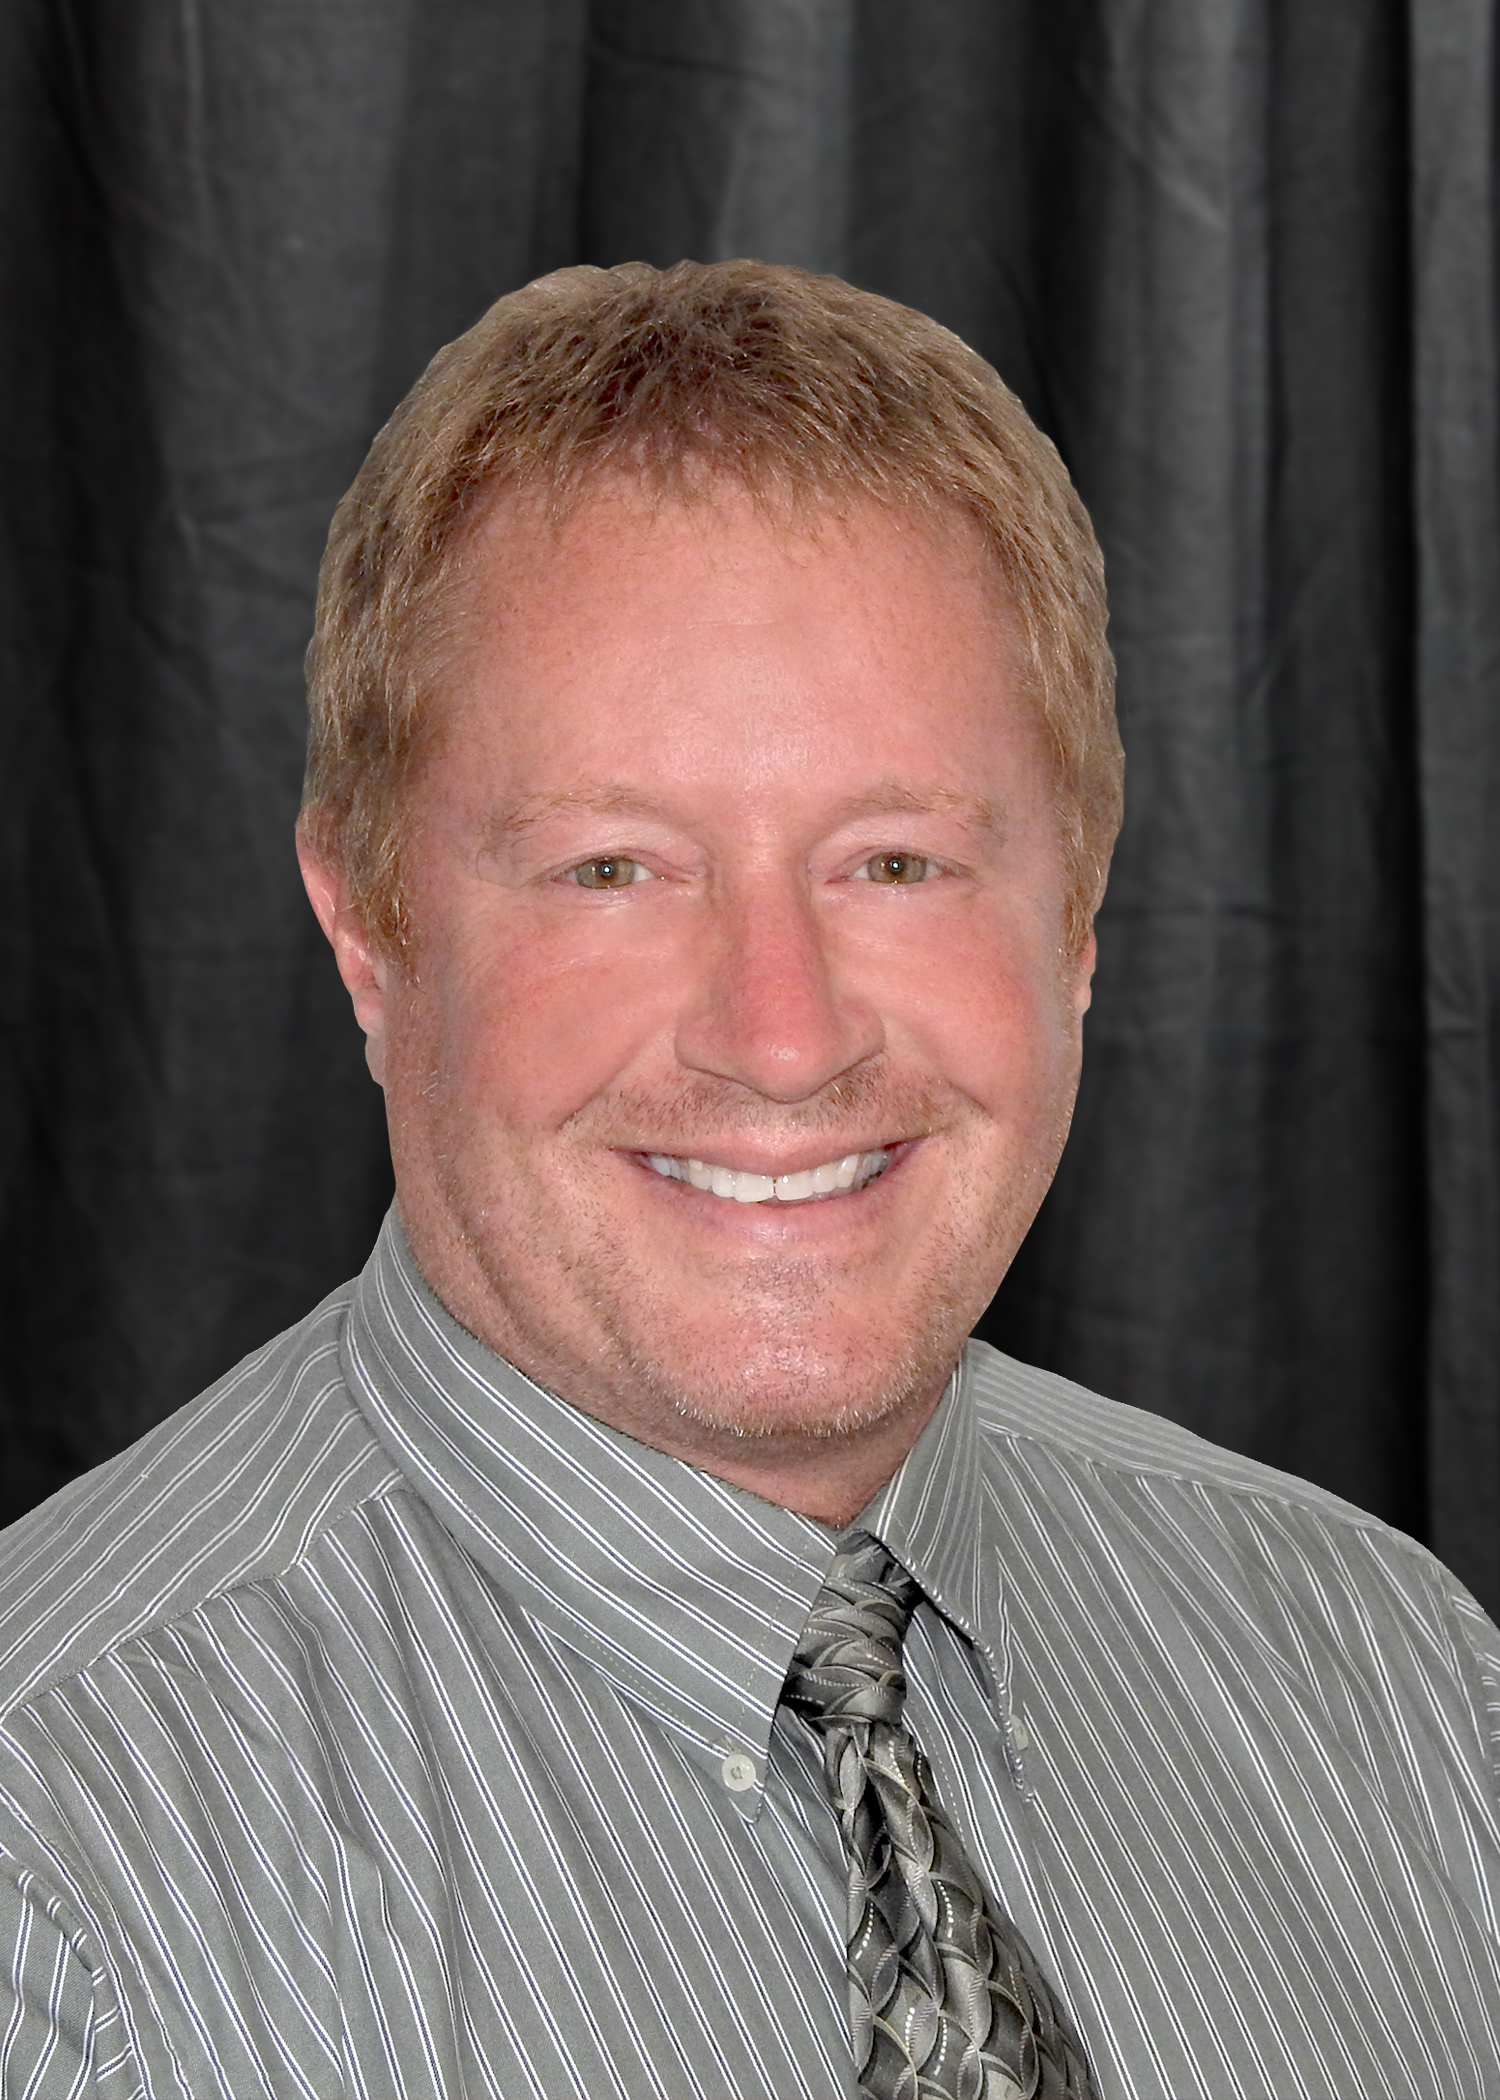 Gasbarre Products has appointed Jerry Uplinger to its tooling group team.